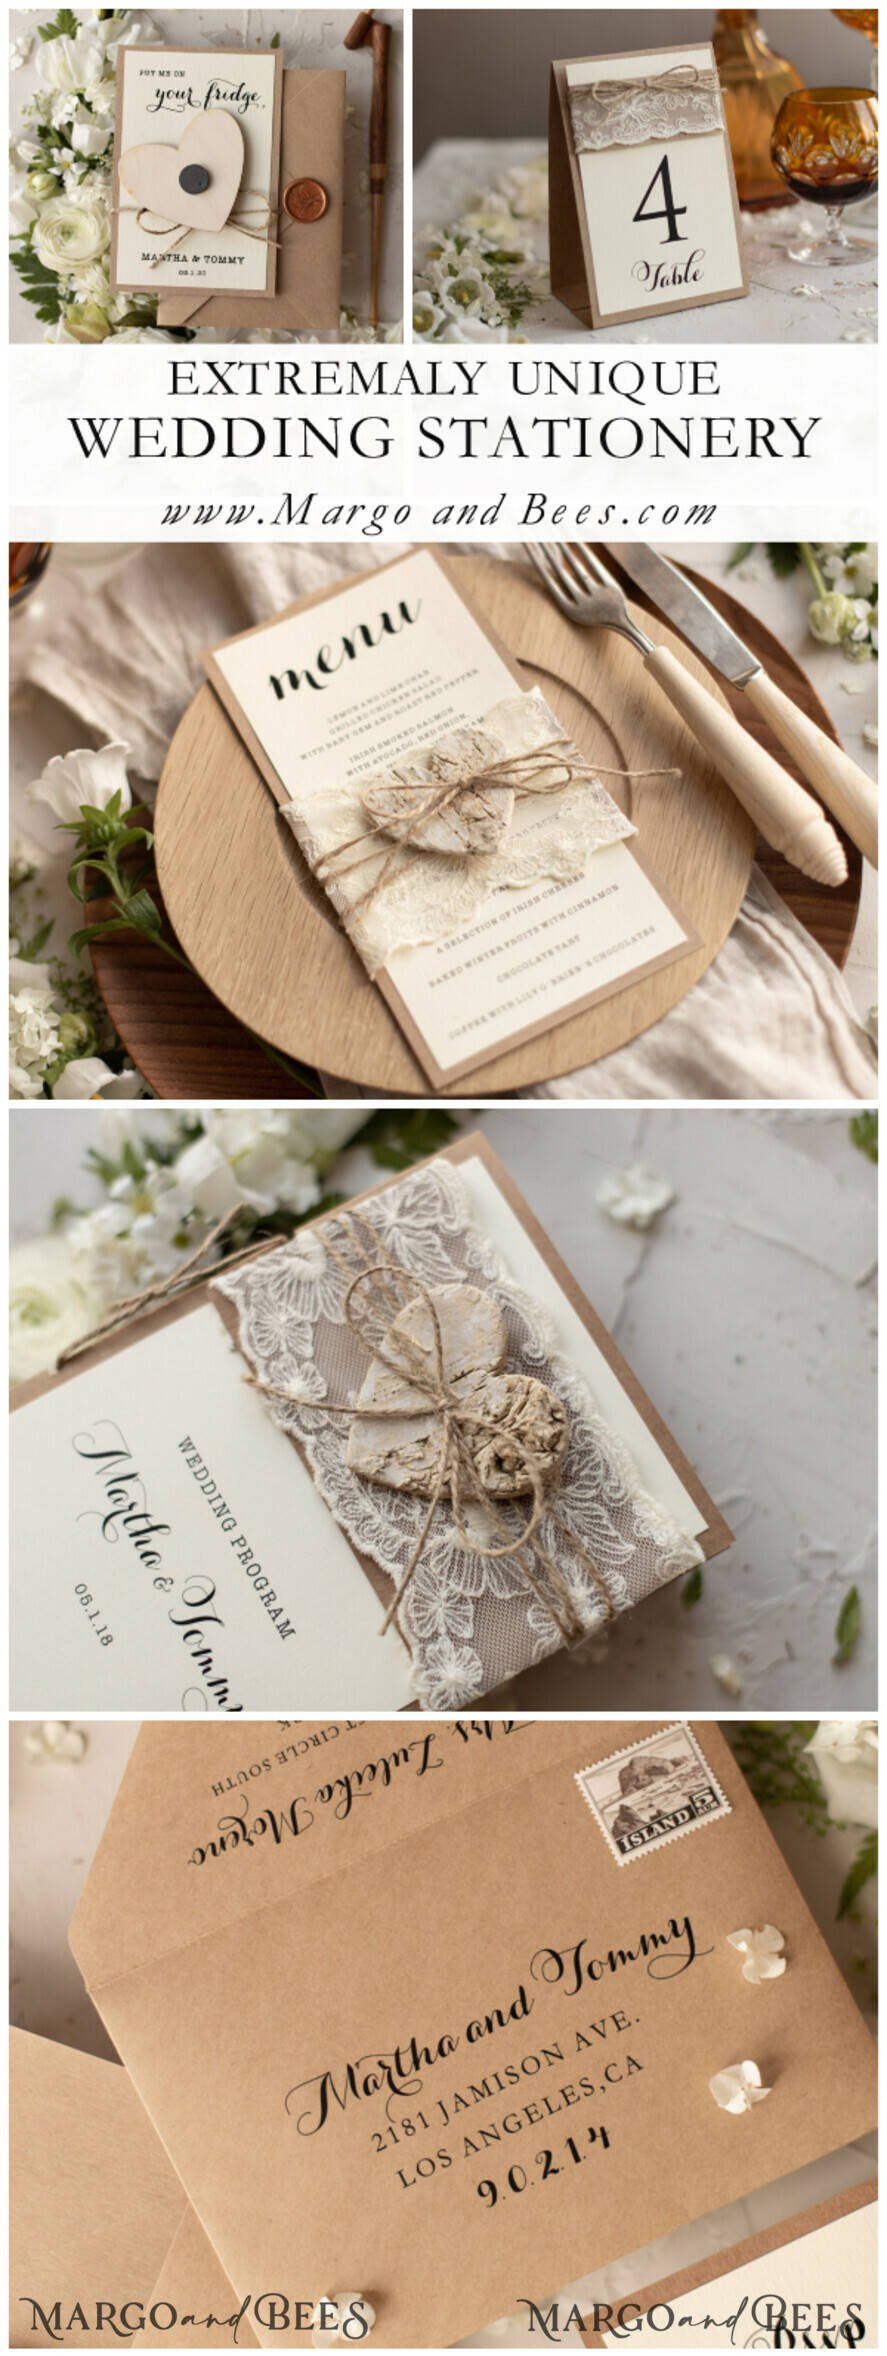 PERSONALISED RUSTIC GREY LACE WEDDING INVITATIONS PACKS OF 10 